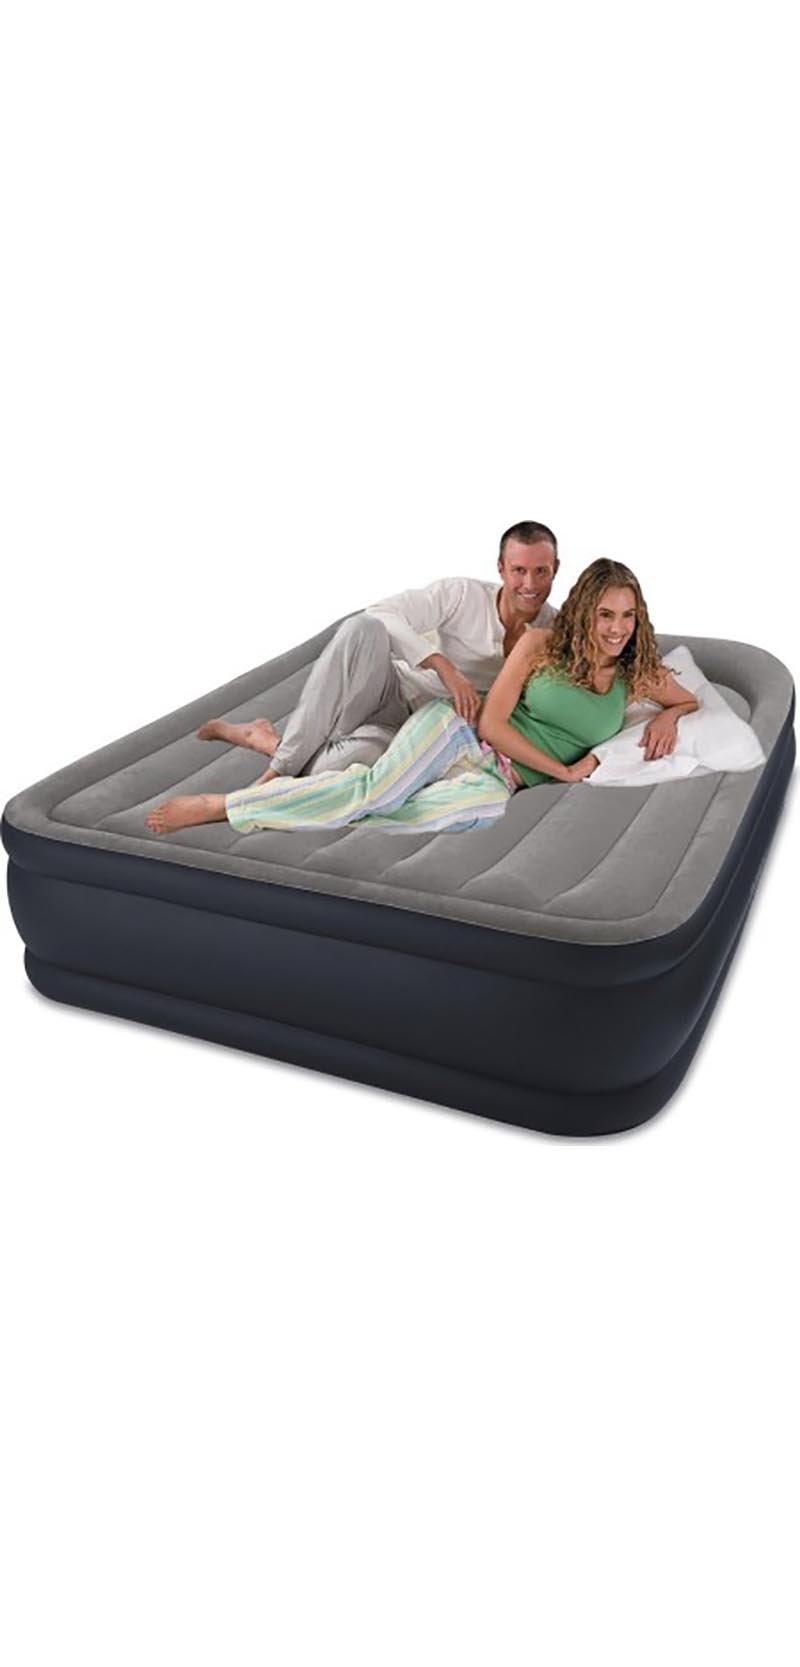 Intex 64136 Pillow Rest Deluxe Raised Airbed